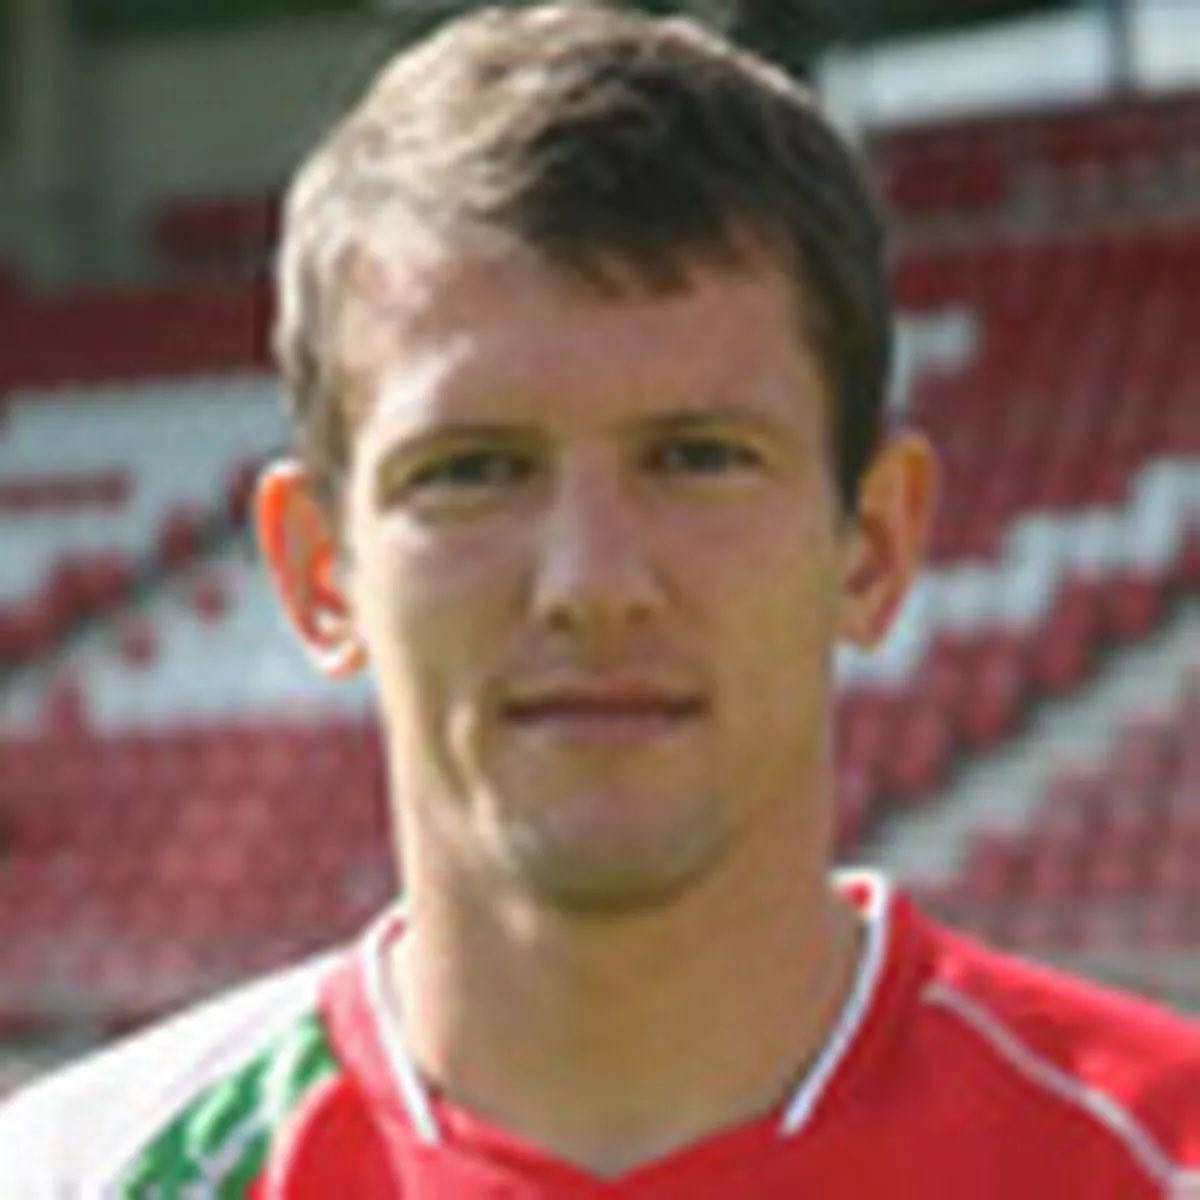 Time to announce a Player for this Sunday’s game @ryanval82 @Wrexham_AFC @leaderlive @LeaderRich #wrexham